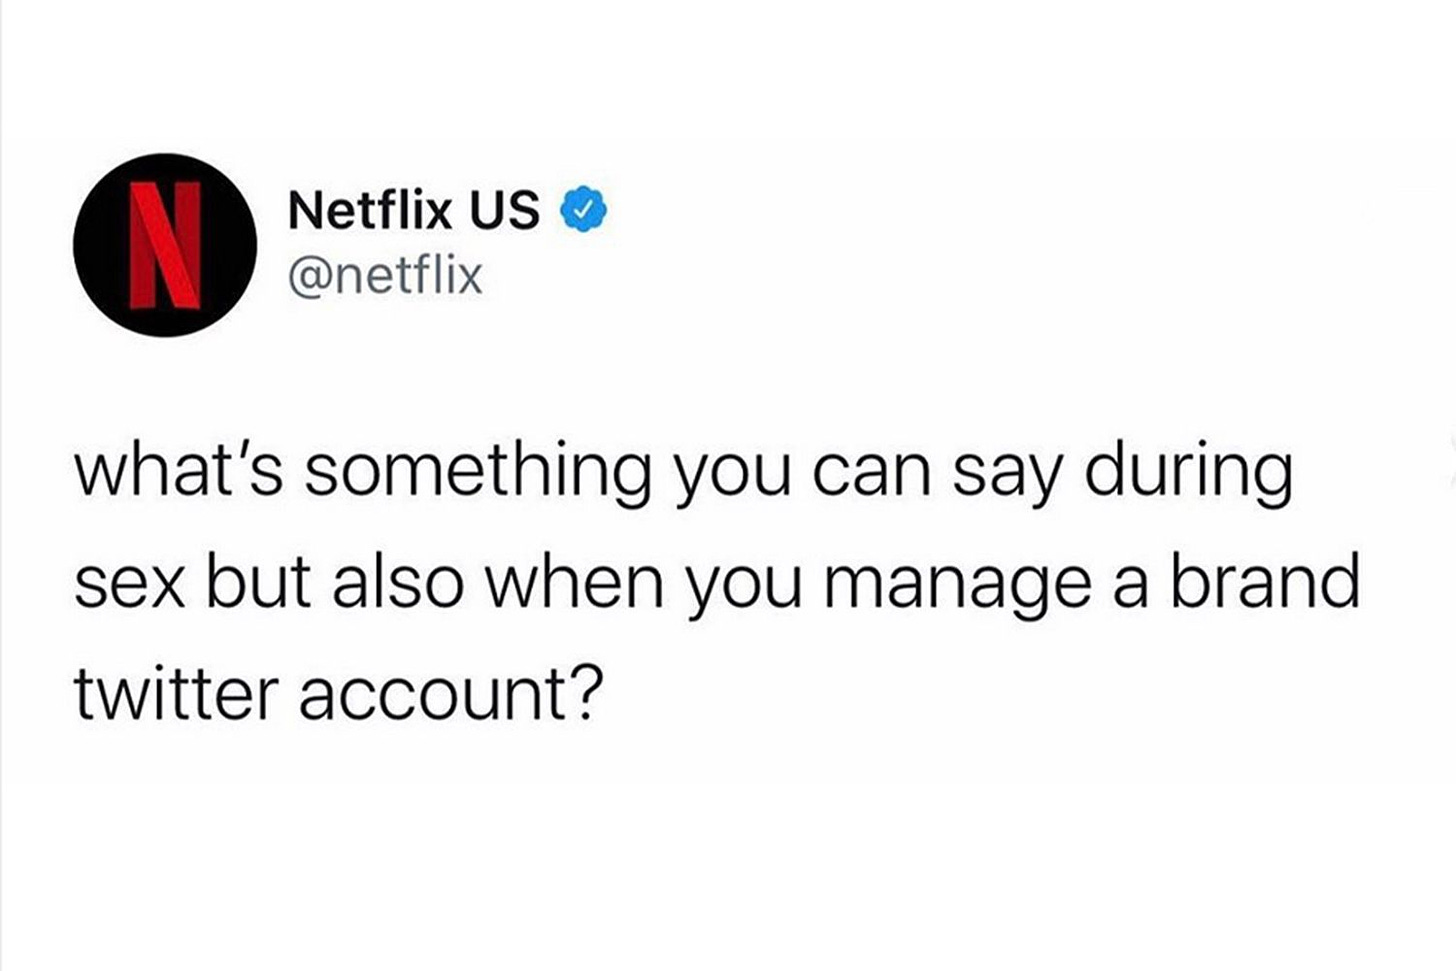 Netflix's Twitter Asks for Brand-Friendly Sexual Double Entendres